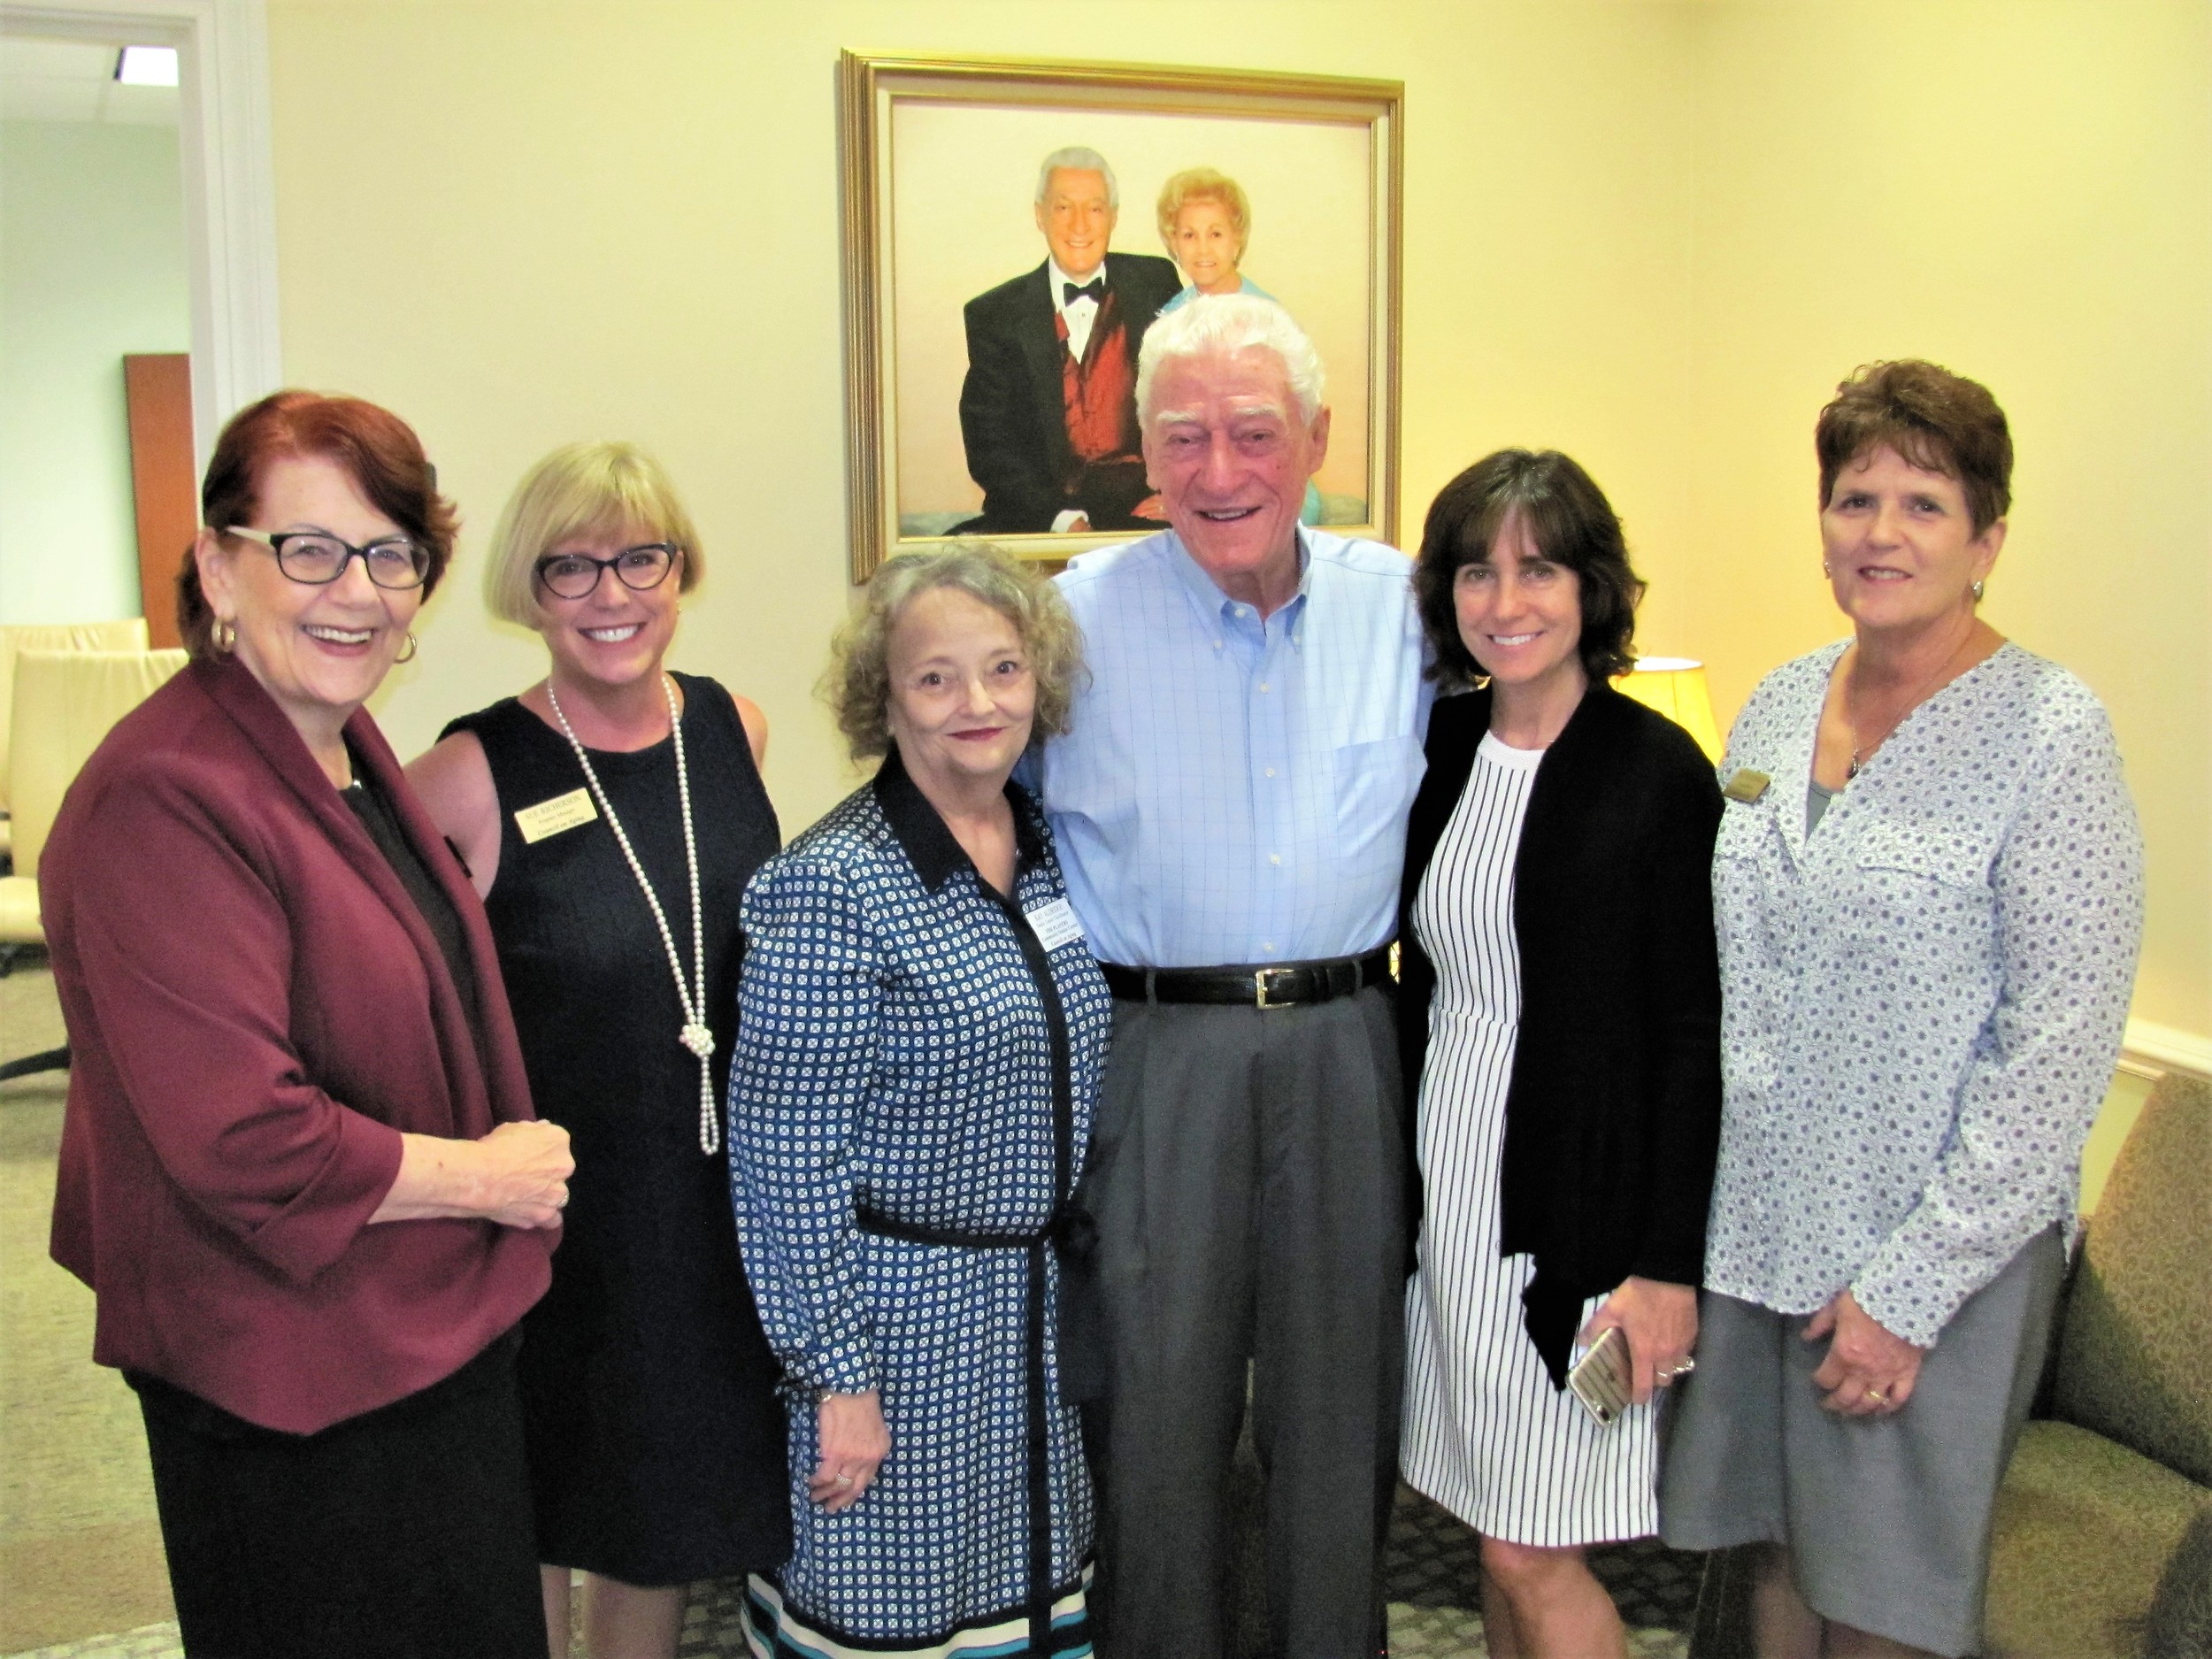 Don Blackburn gathers with (from left) Marian Ashton, Sue Richerson, Kay Aldridge, Becky Yanni and Pat O’Connell from the Council on Aging